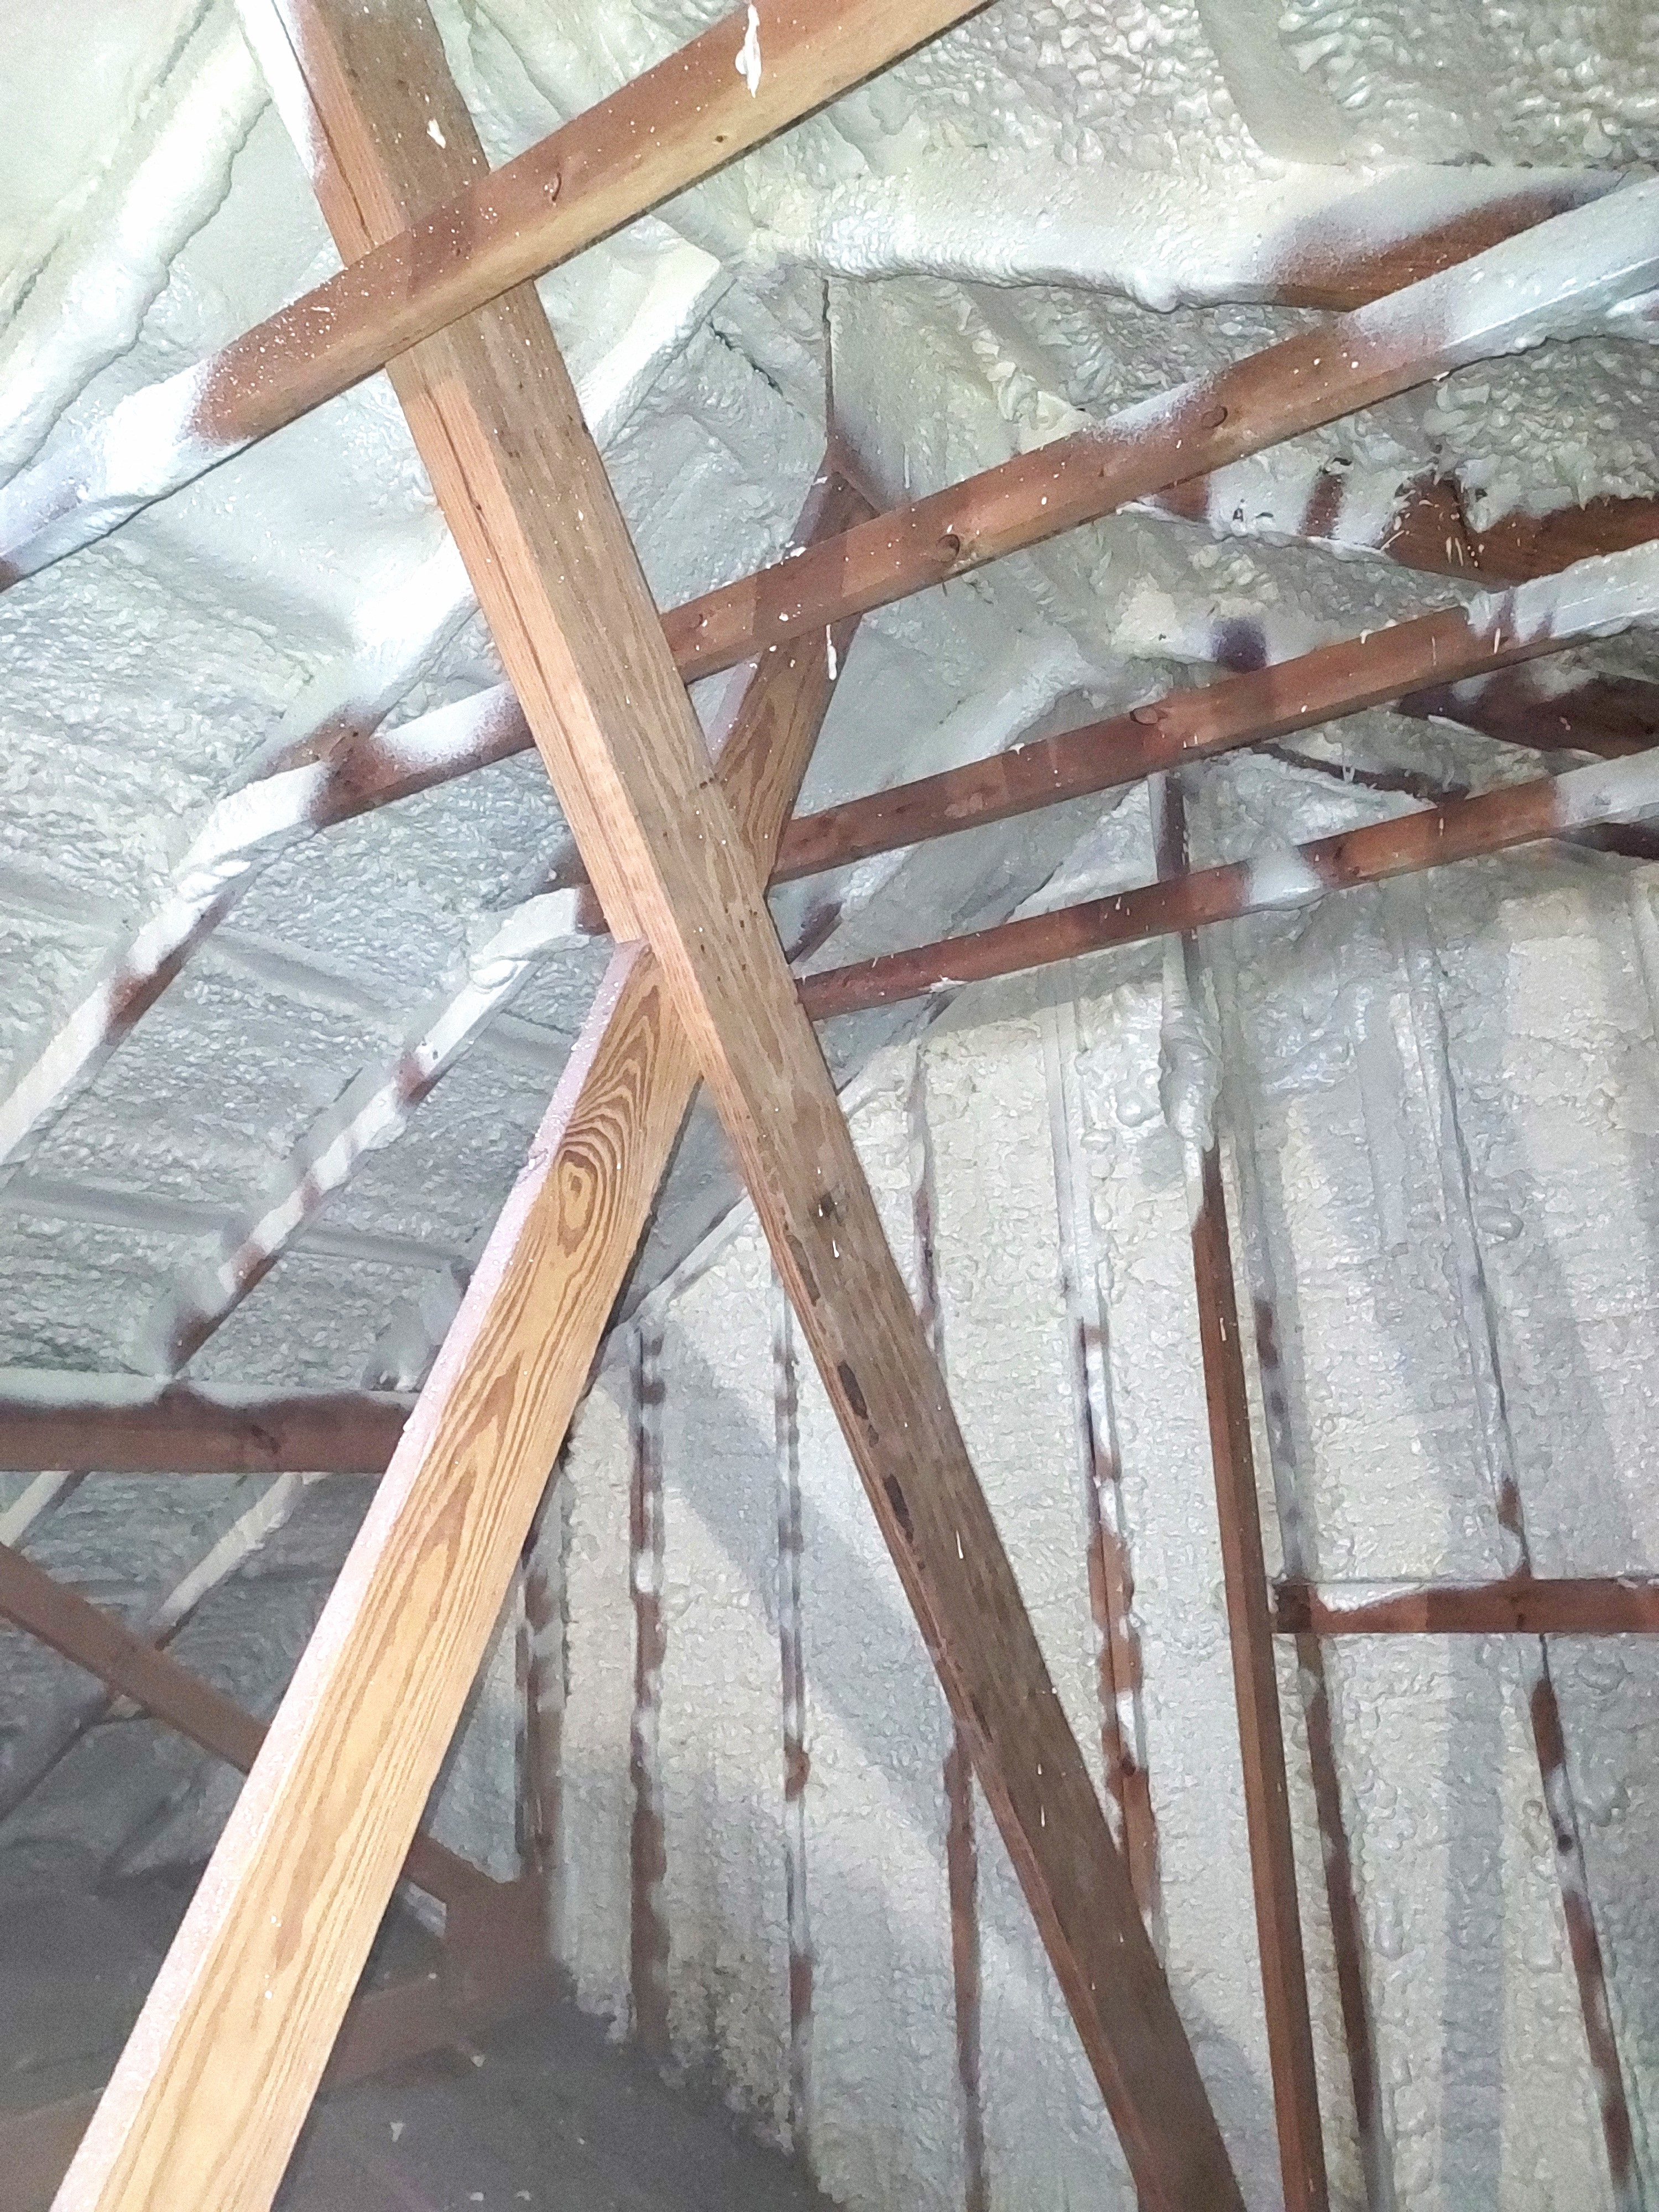 Closed Cell Spray Foam Insulation Installed In Attic Space of Louisiana Home